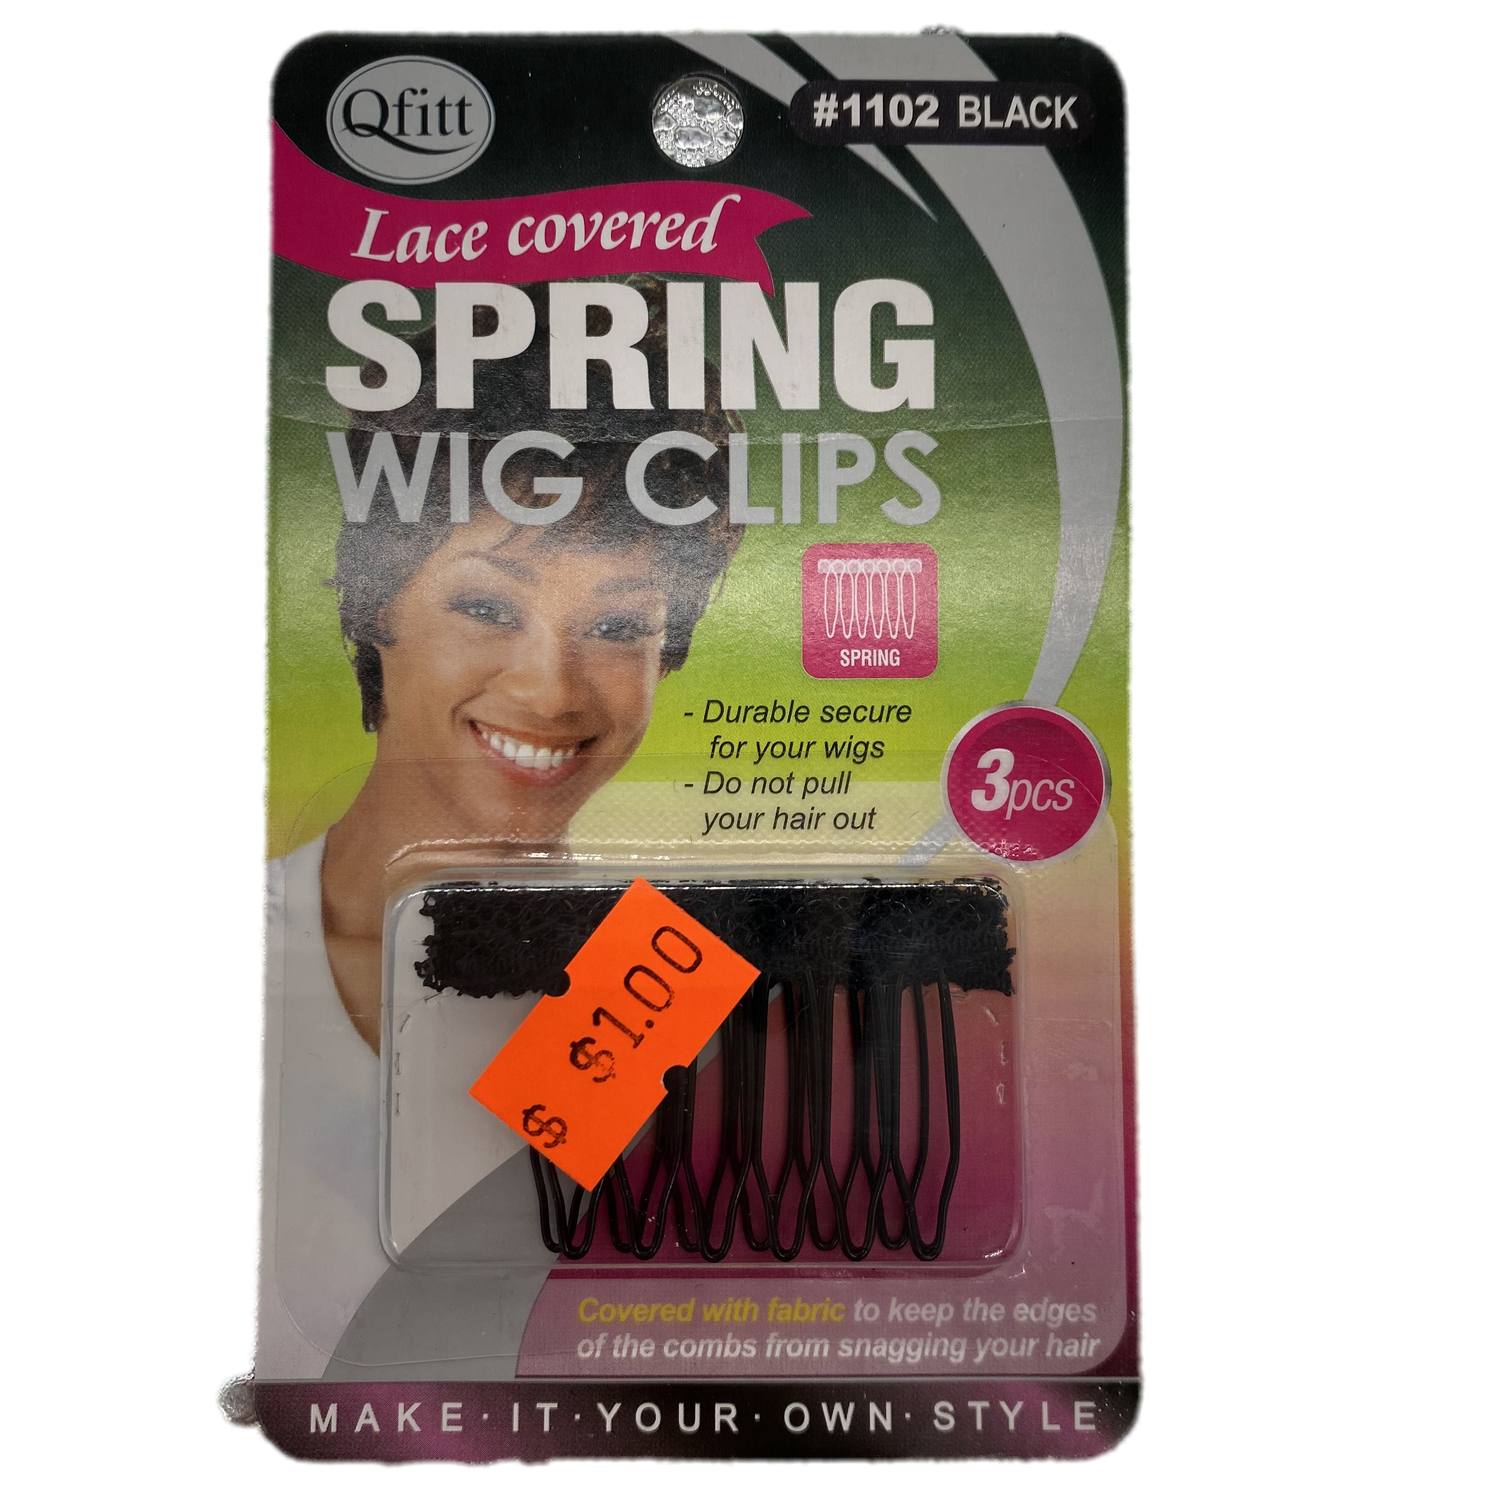 Qfitt Lace Covered Spring Wig Clips - VIP Extensions